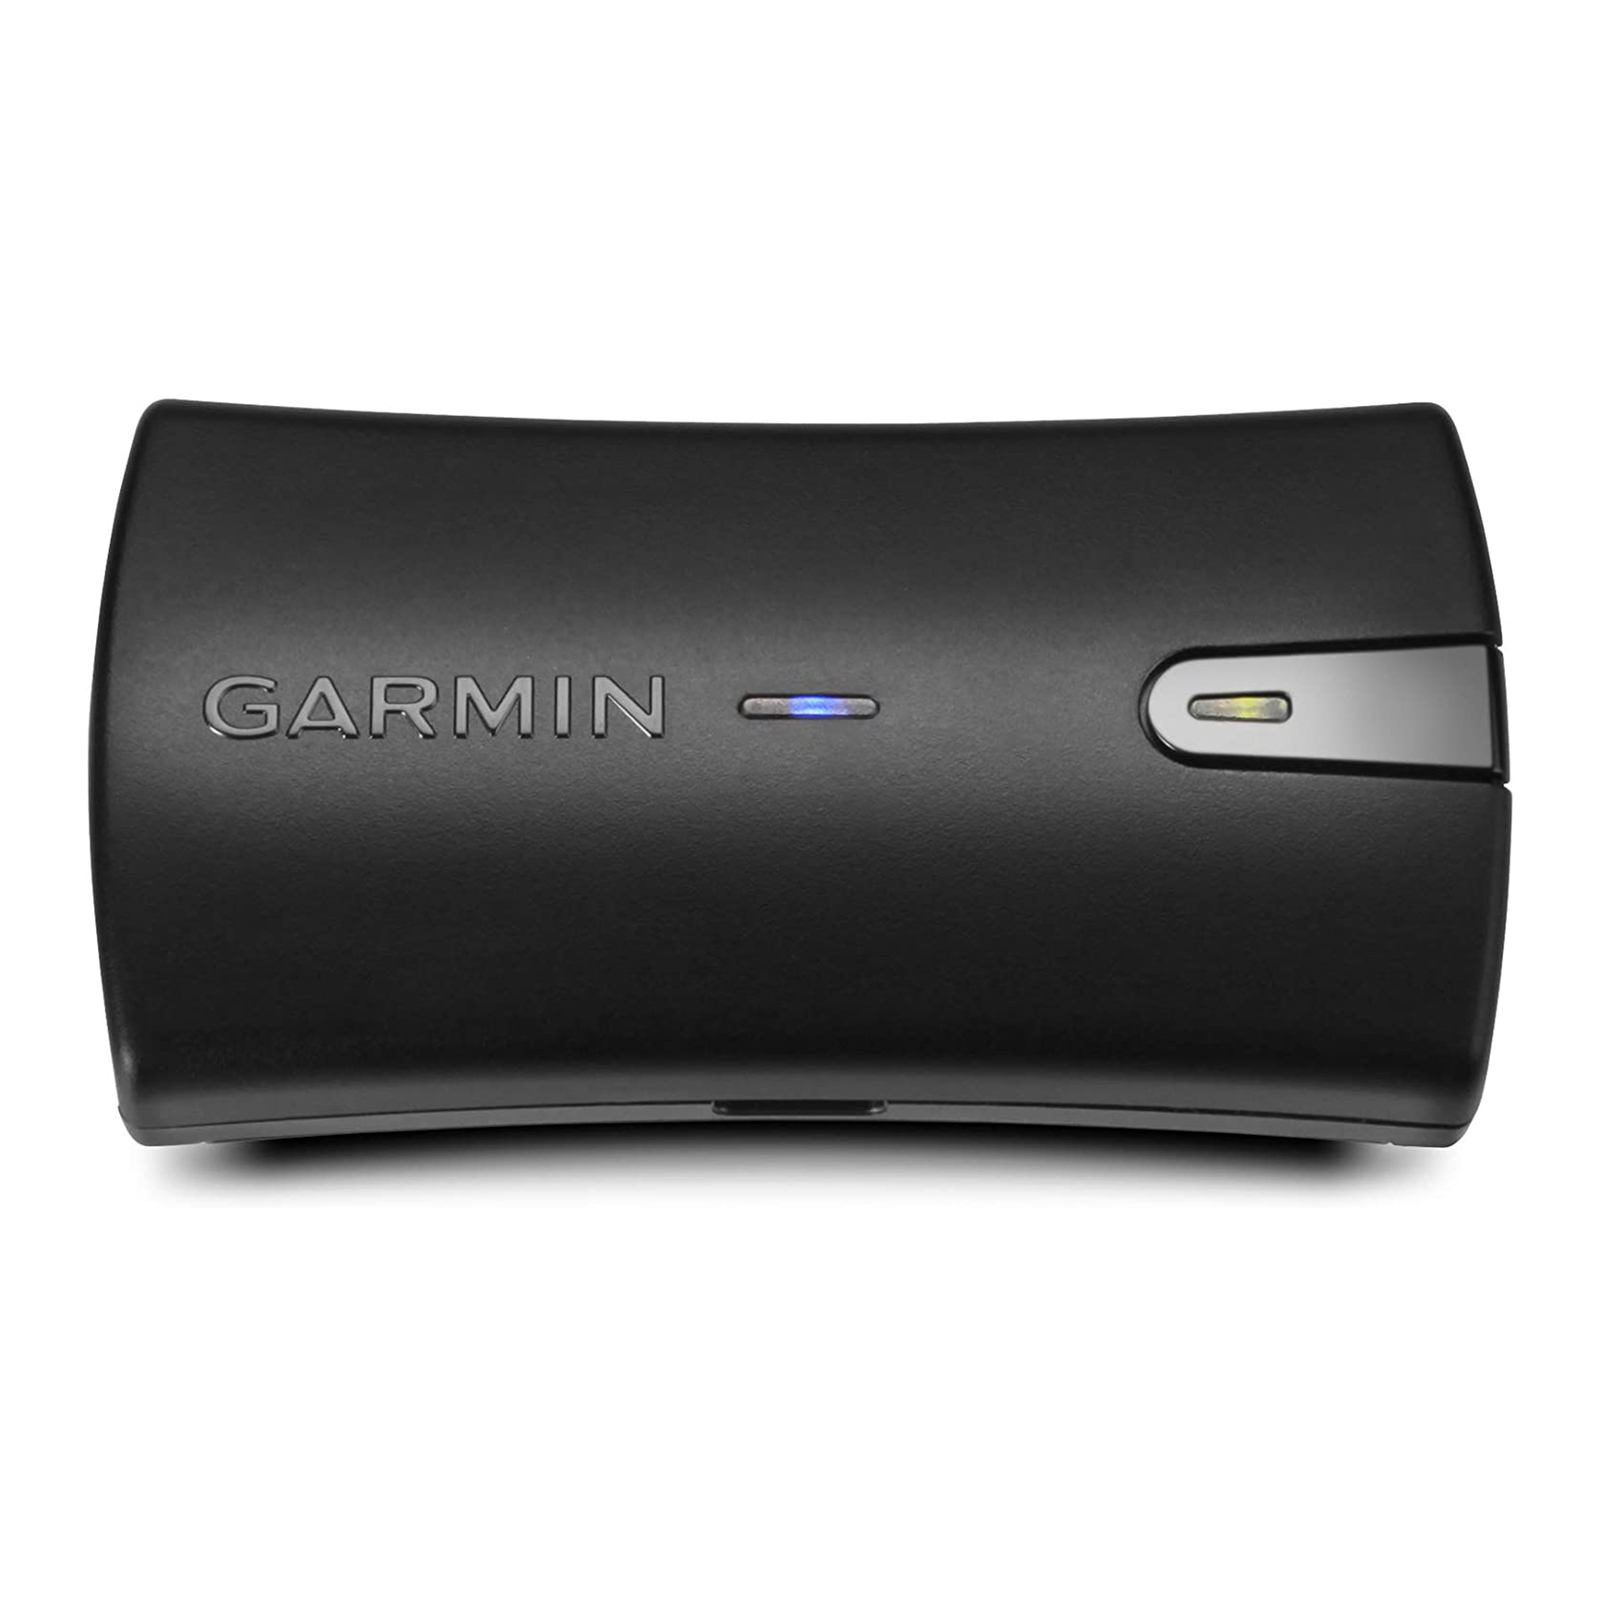 Garmin 2 Portable Bluetooth GPS for Aviation Mobile Devices